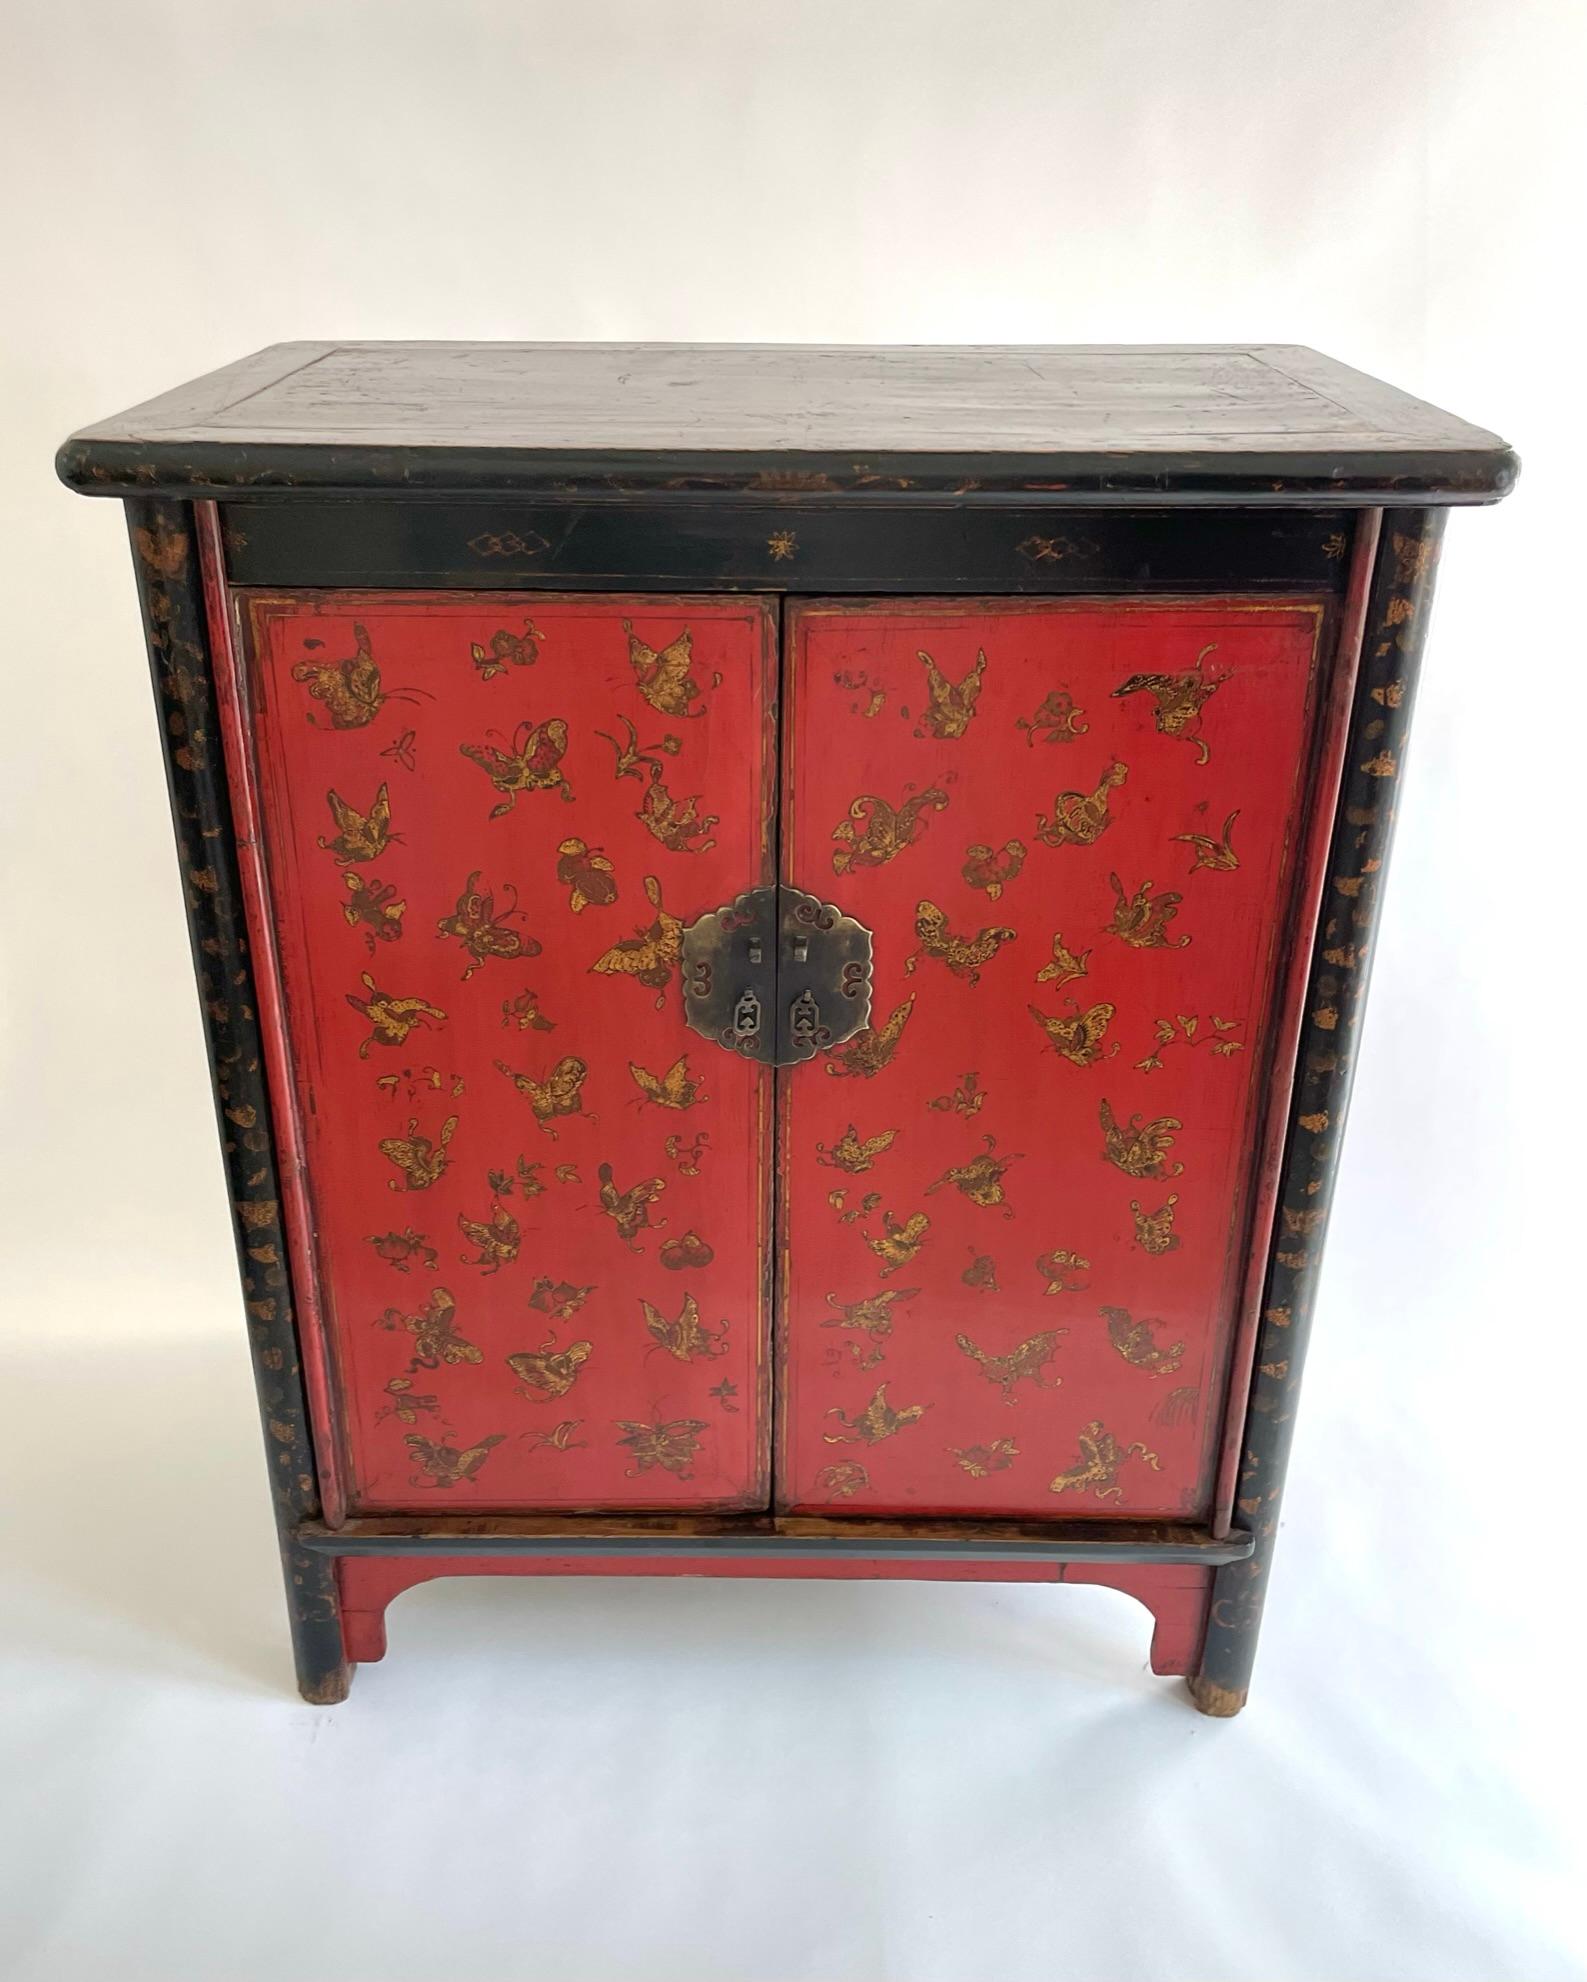 Beautifully painted Chinese red lacquered cabinet with gilded butterflies. Hand crafted and hand painted from the Shanxi province of north China during the early 18th century. The wood used is Yumu (northern elm). The butterflies are painted with